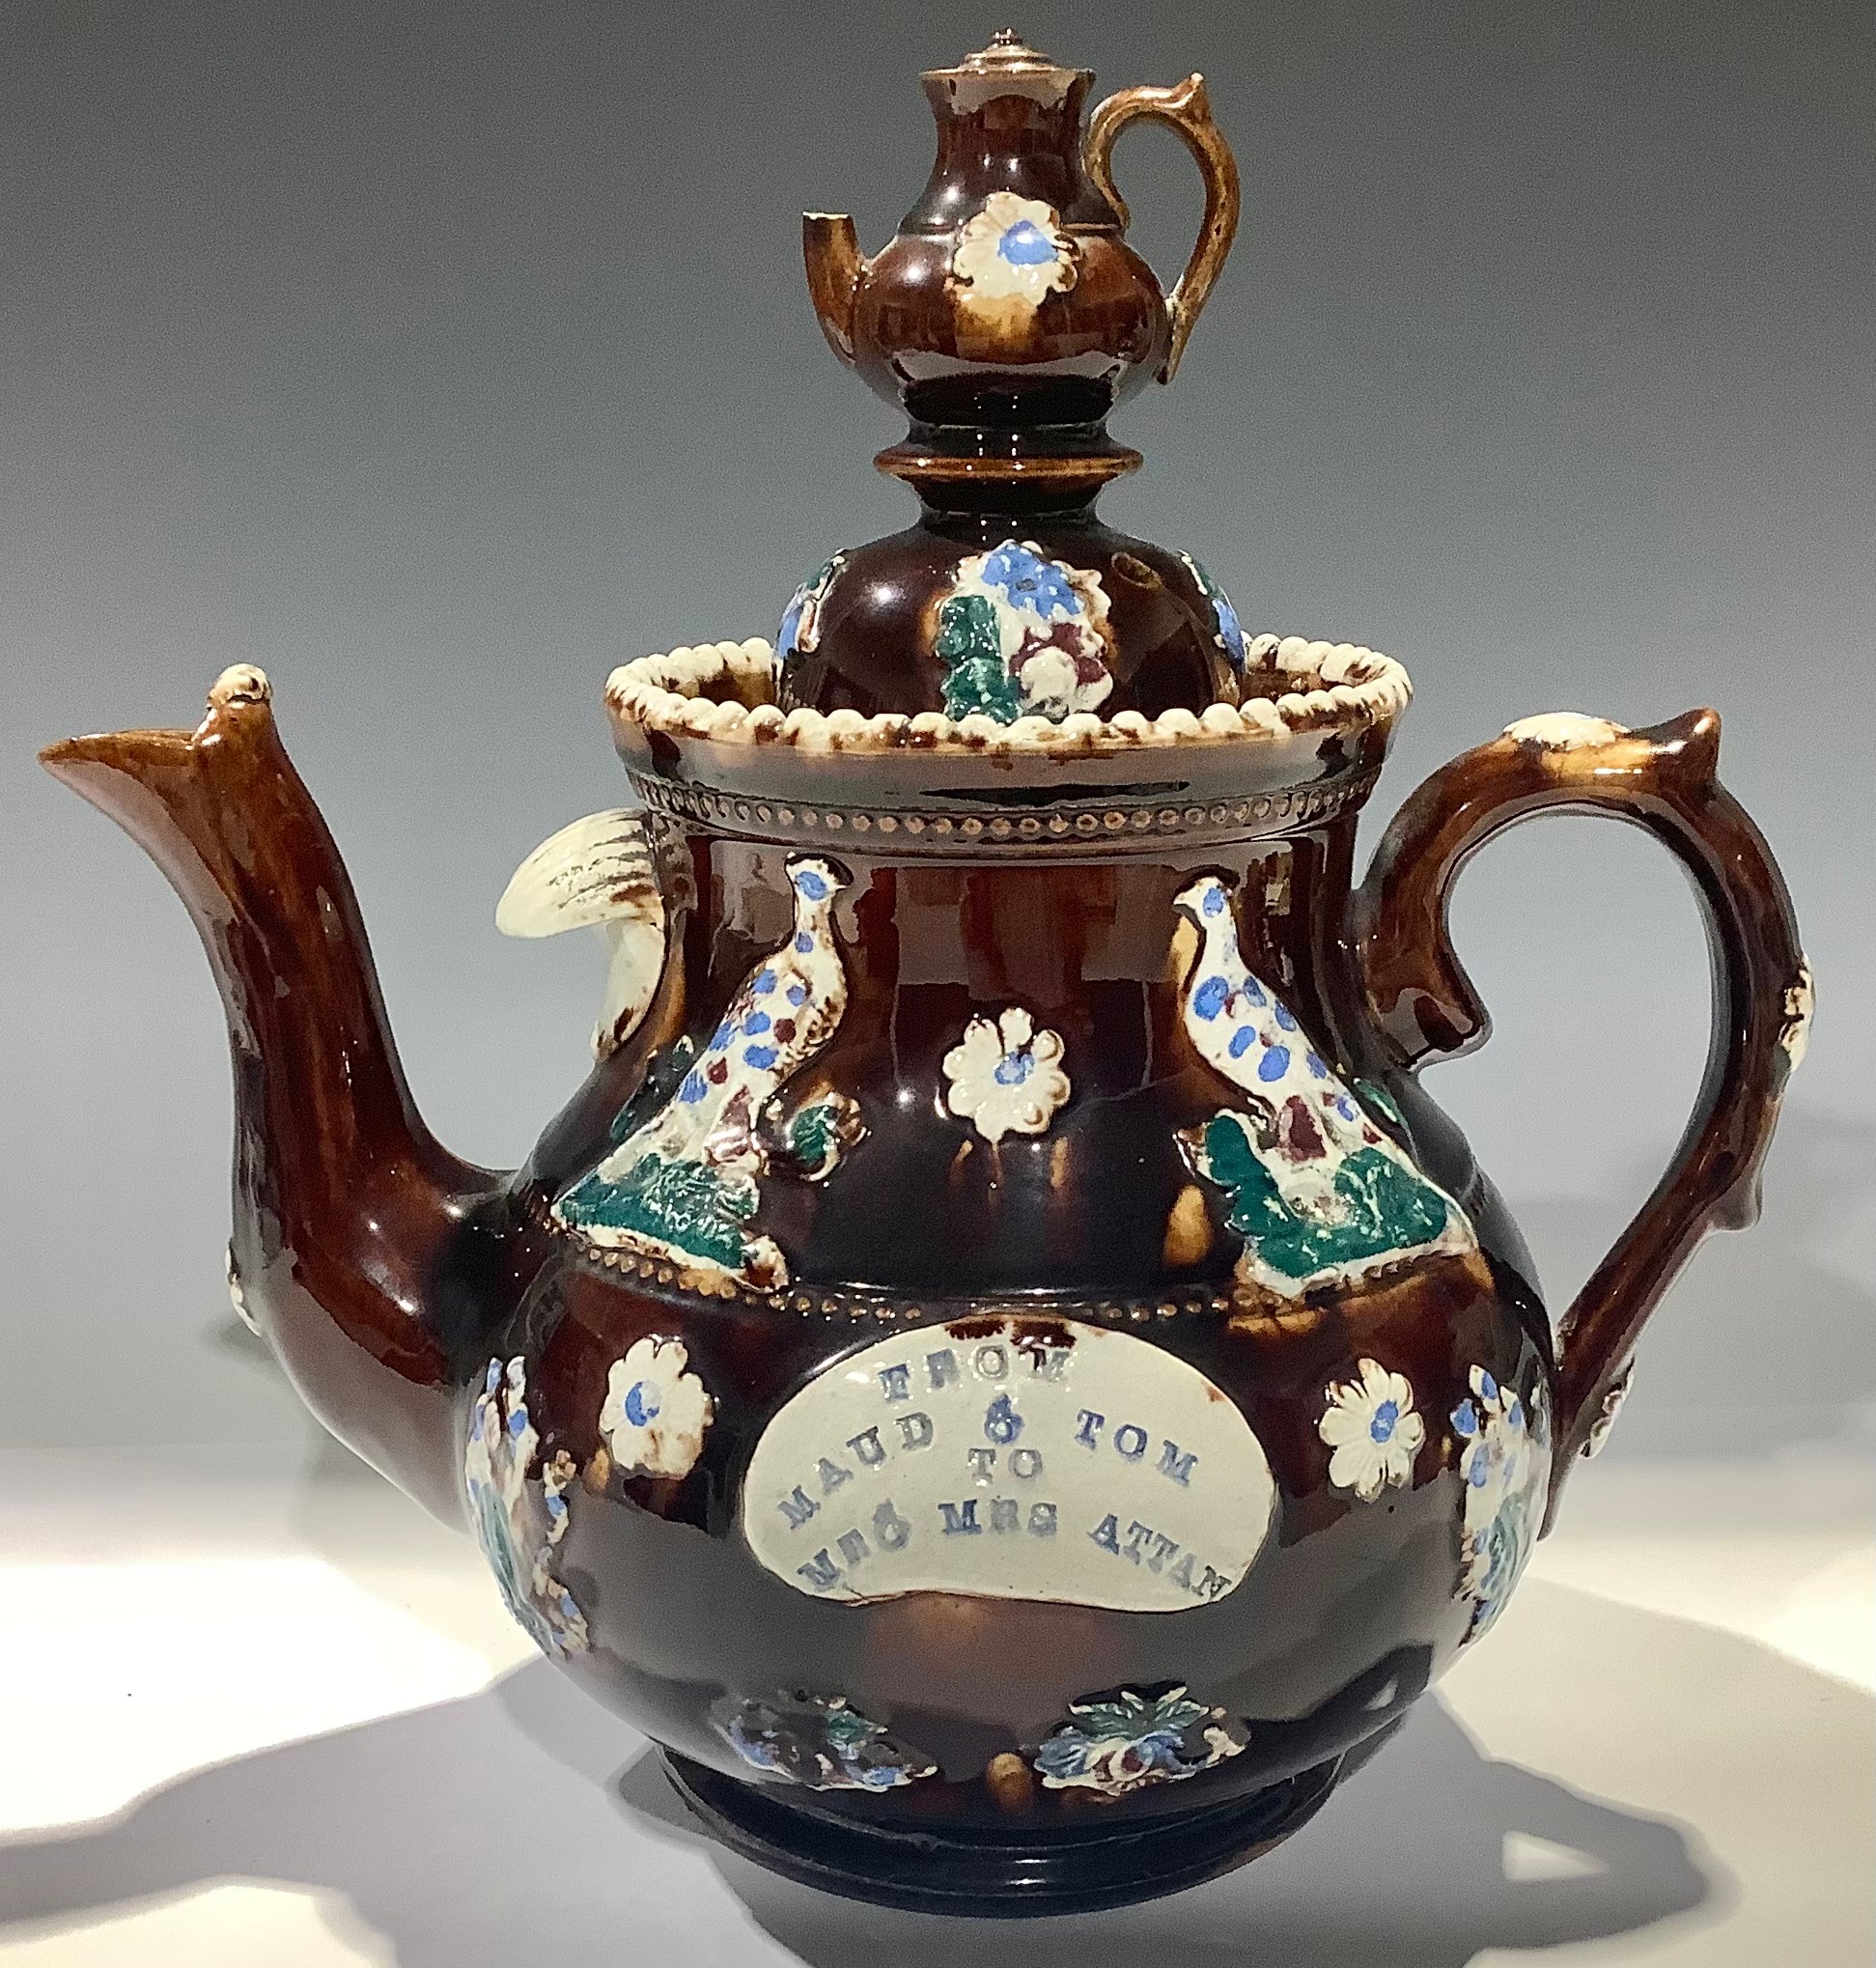 A late 19th century barge ware teapot, treacle glaze, "From Maud and Tom to Mr and Mrs Attan", domed